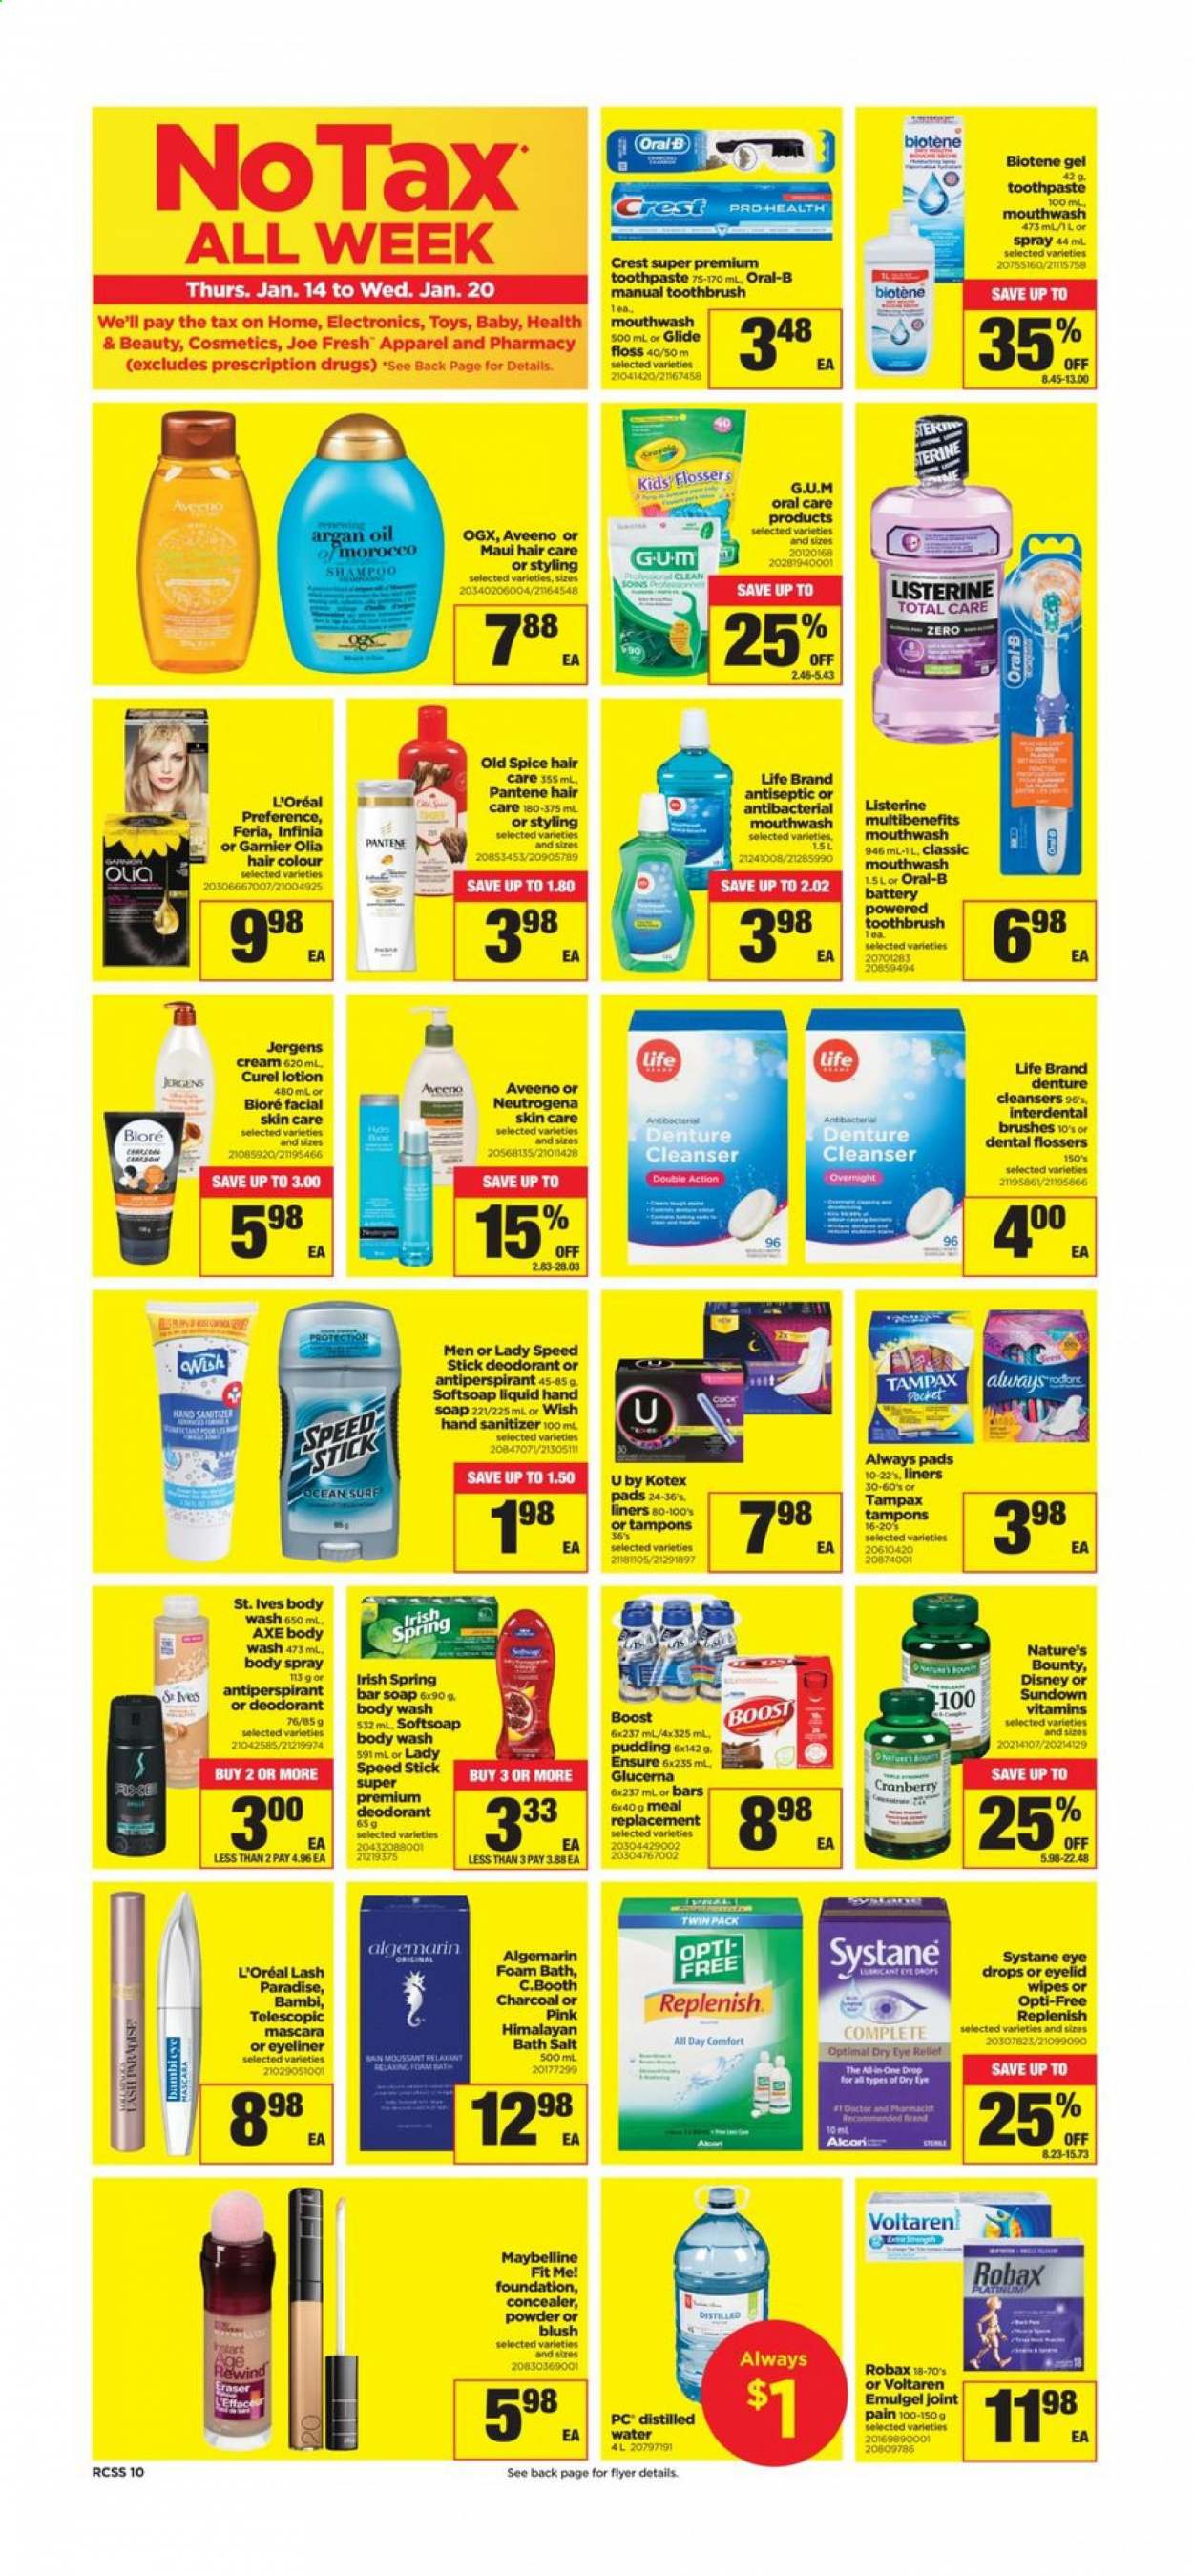 thumbnail - Real Canadian Superstore Flyer - January 14, 2021 - January 20, 2021 - Sales products - Disney, pudding, spice, Boost, tea, wipes, Aveeno, bath salt, body wash, Softsoap, hand soap, bath foam, soap bar, soap, Biotene, toothbrush, toothpaste, mouthwash, Crest, Always pads, Kotex, Kotex pads, tampons, cleanser, L’Oréal, Curél, Bioré®, OGX, hair color, body lotion, body spray, Jergens, anti-perspirant, Speed Stick, lubricant, hand sanitizer, corrector, eyeliner, eraser, battery, toys, Nature's Bounty, Glucerna, eye drops, argan oil, Garnier, Listerine, mascara, Maybelline, Neutrogena, shampoo, Systane, Tampax, Pantene, Old Spice, Oral-B, deodorant. Page 10.